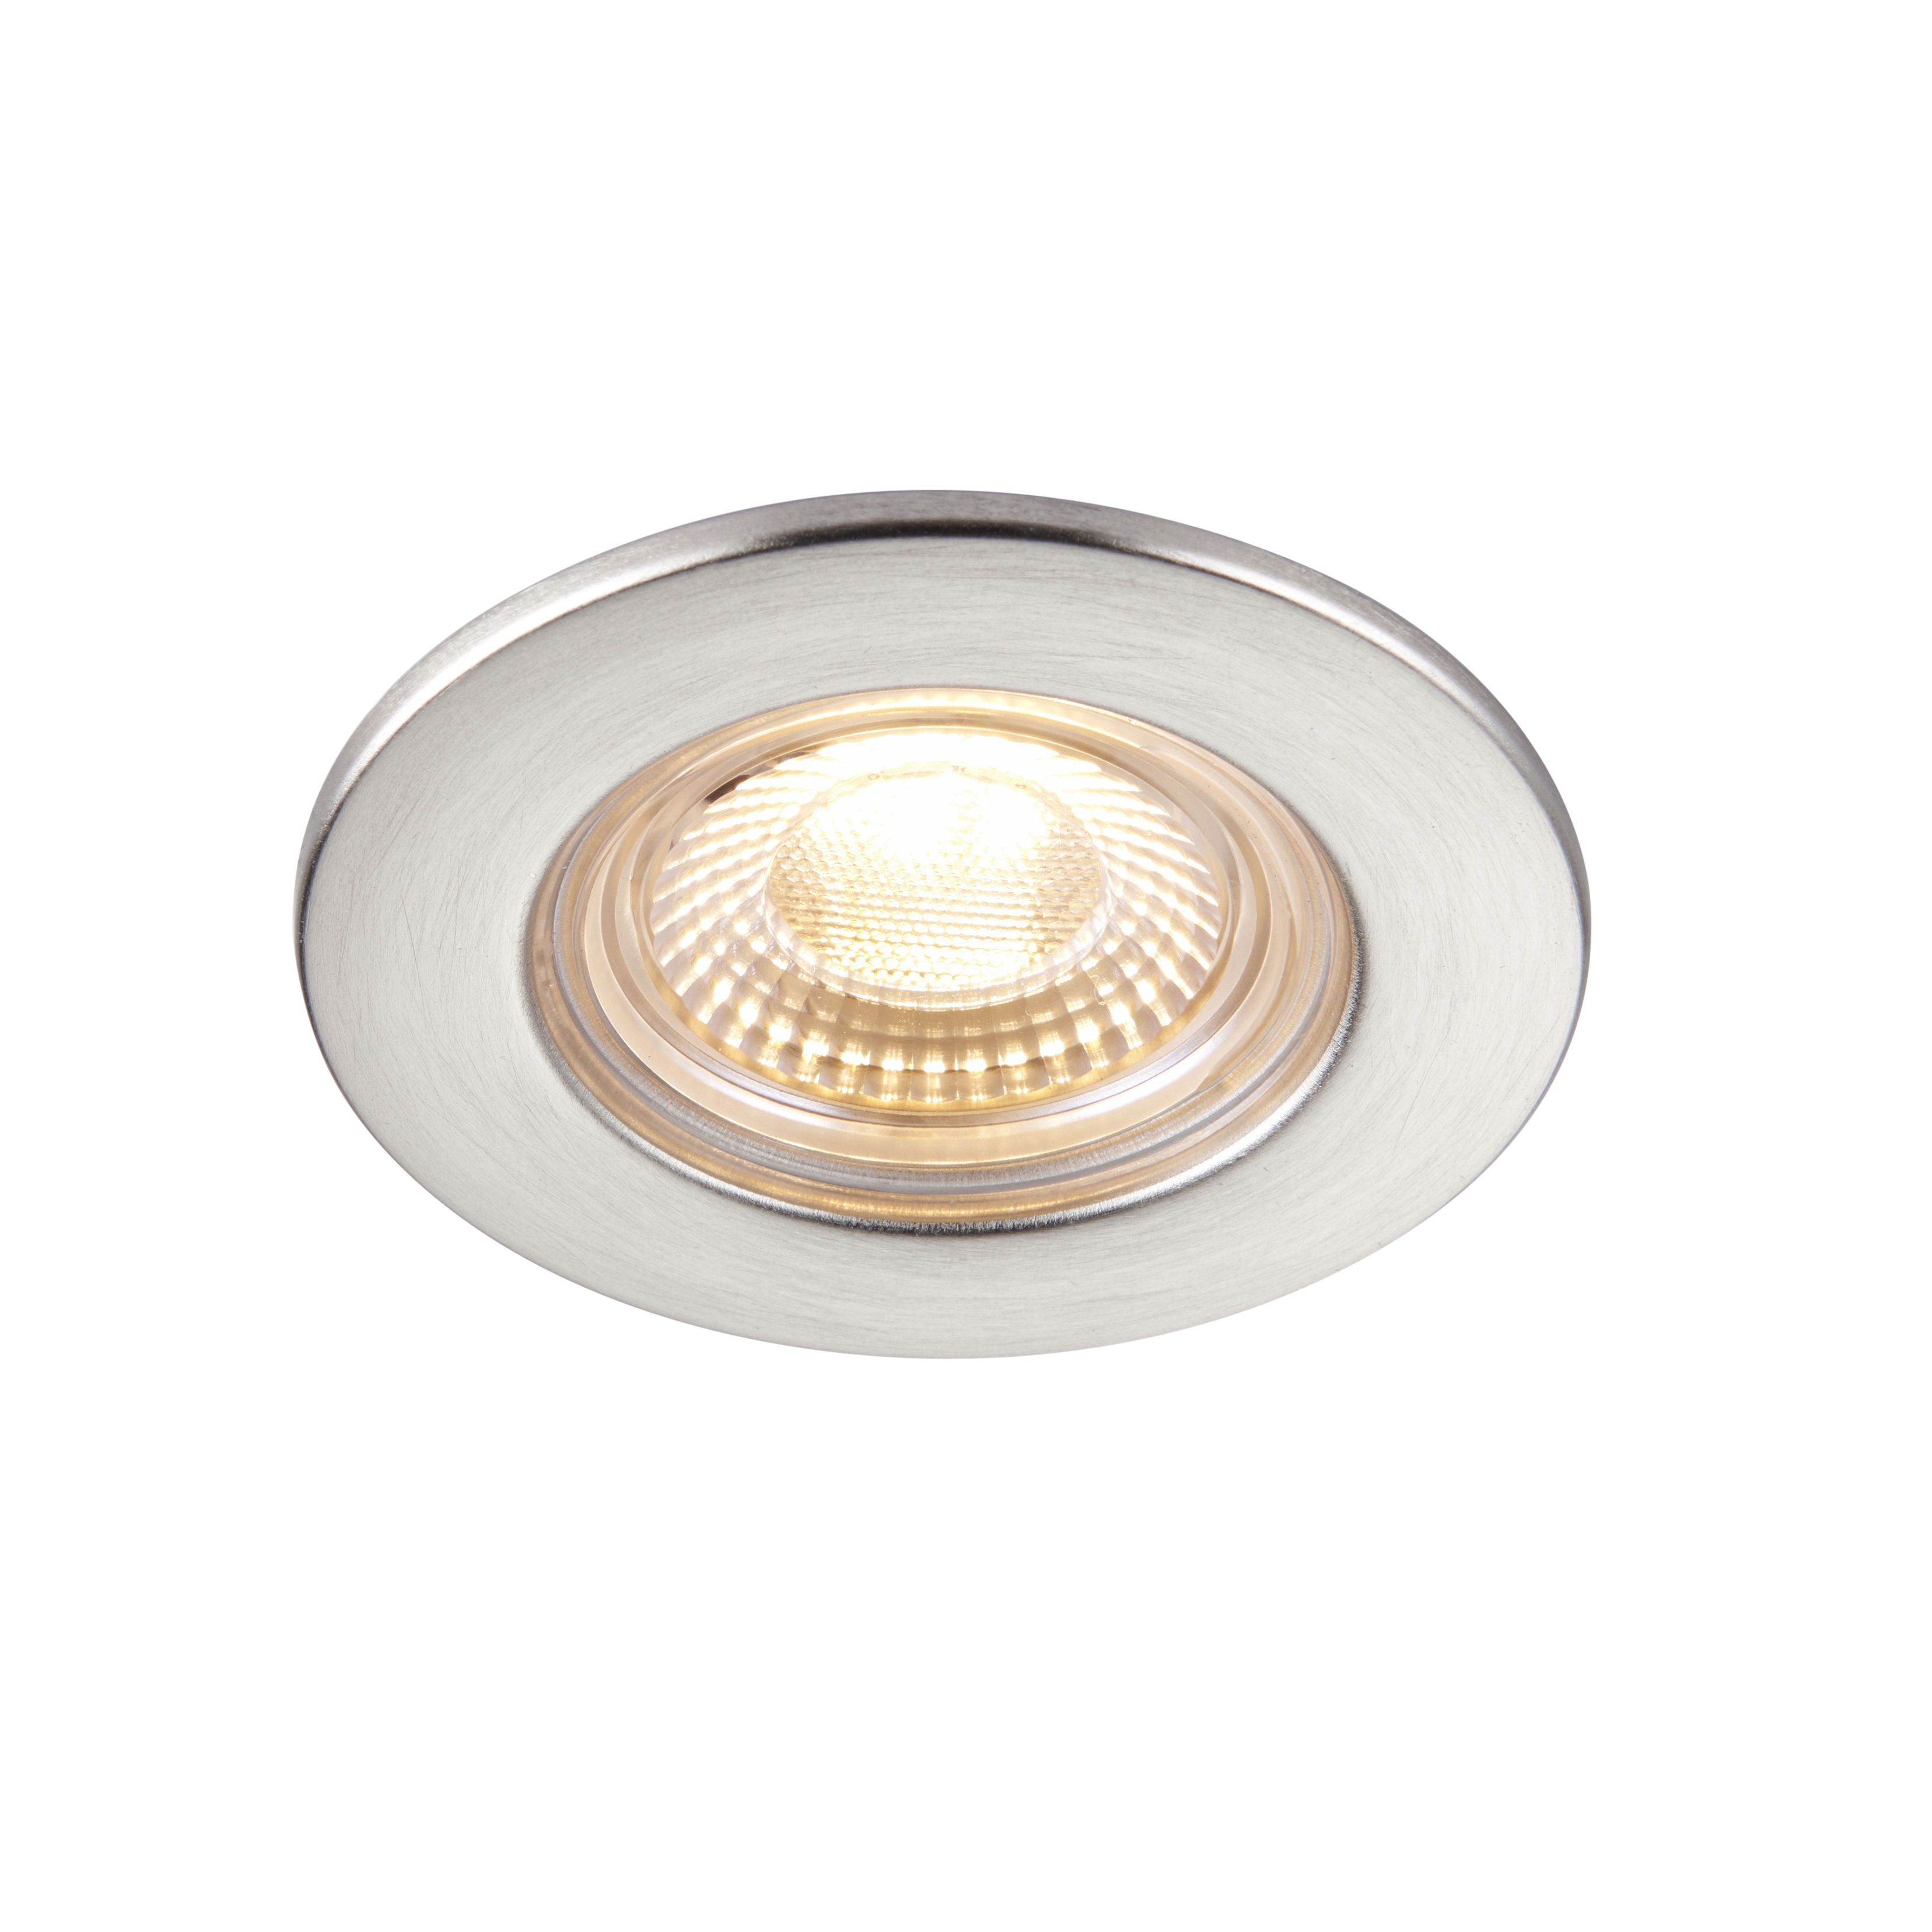 GuardECO Nickel effect Non-adjustable LED Warm white Downlight 6W IP65